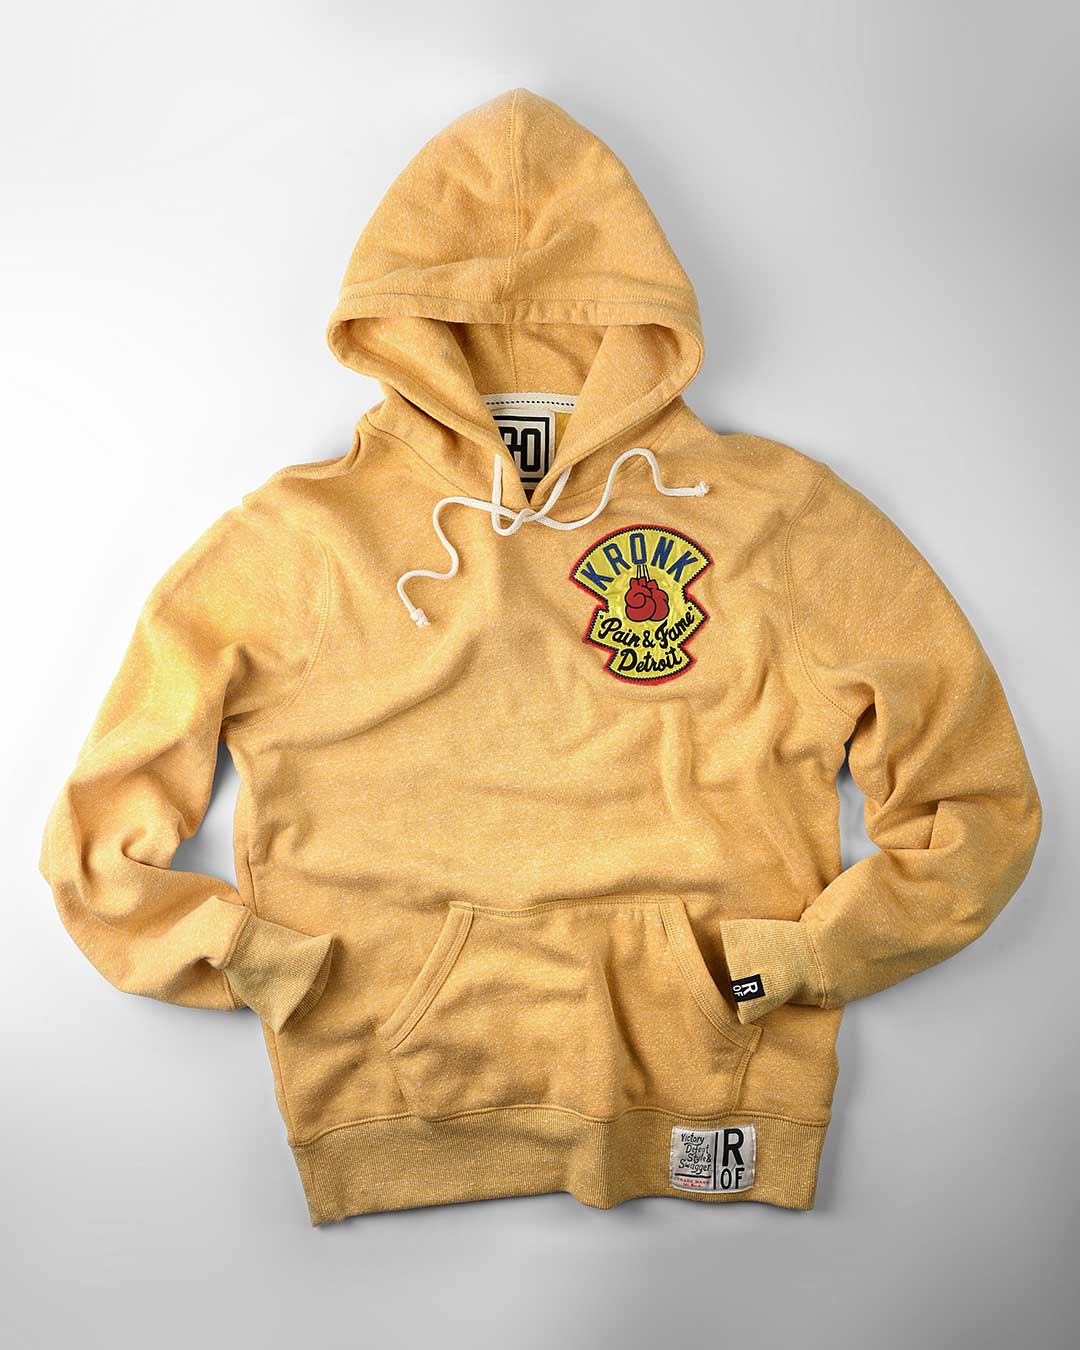 Kronk &#39;Pain &amp; Fame&#39; Yellow PO Hoody - Roots of Fight